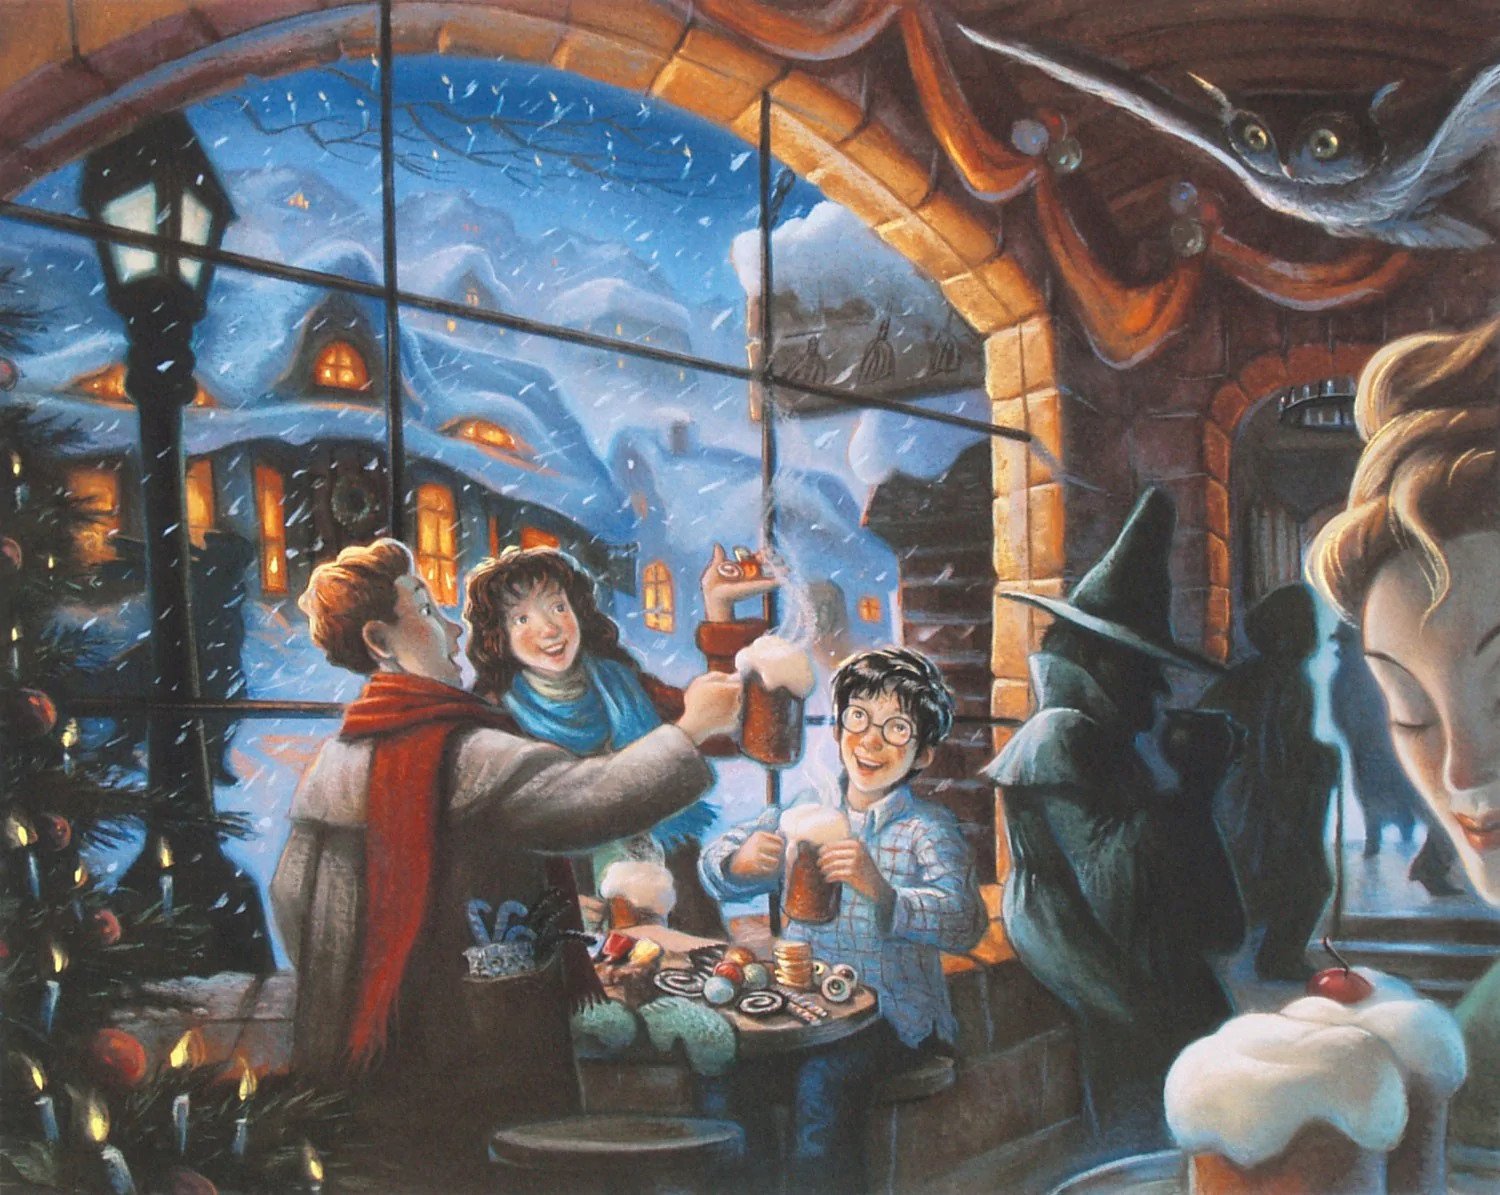 Harry Potter and his friends enjoying a glass of butter beer at the three broomsticks, on a cold winter evening. 